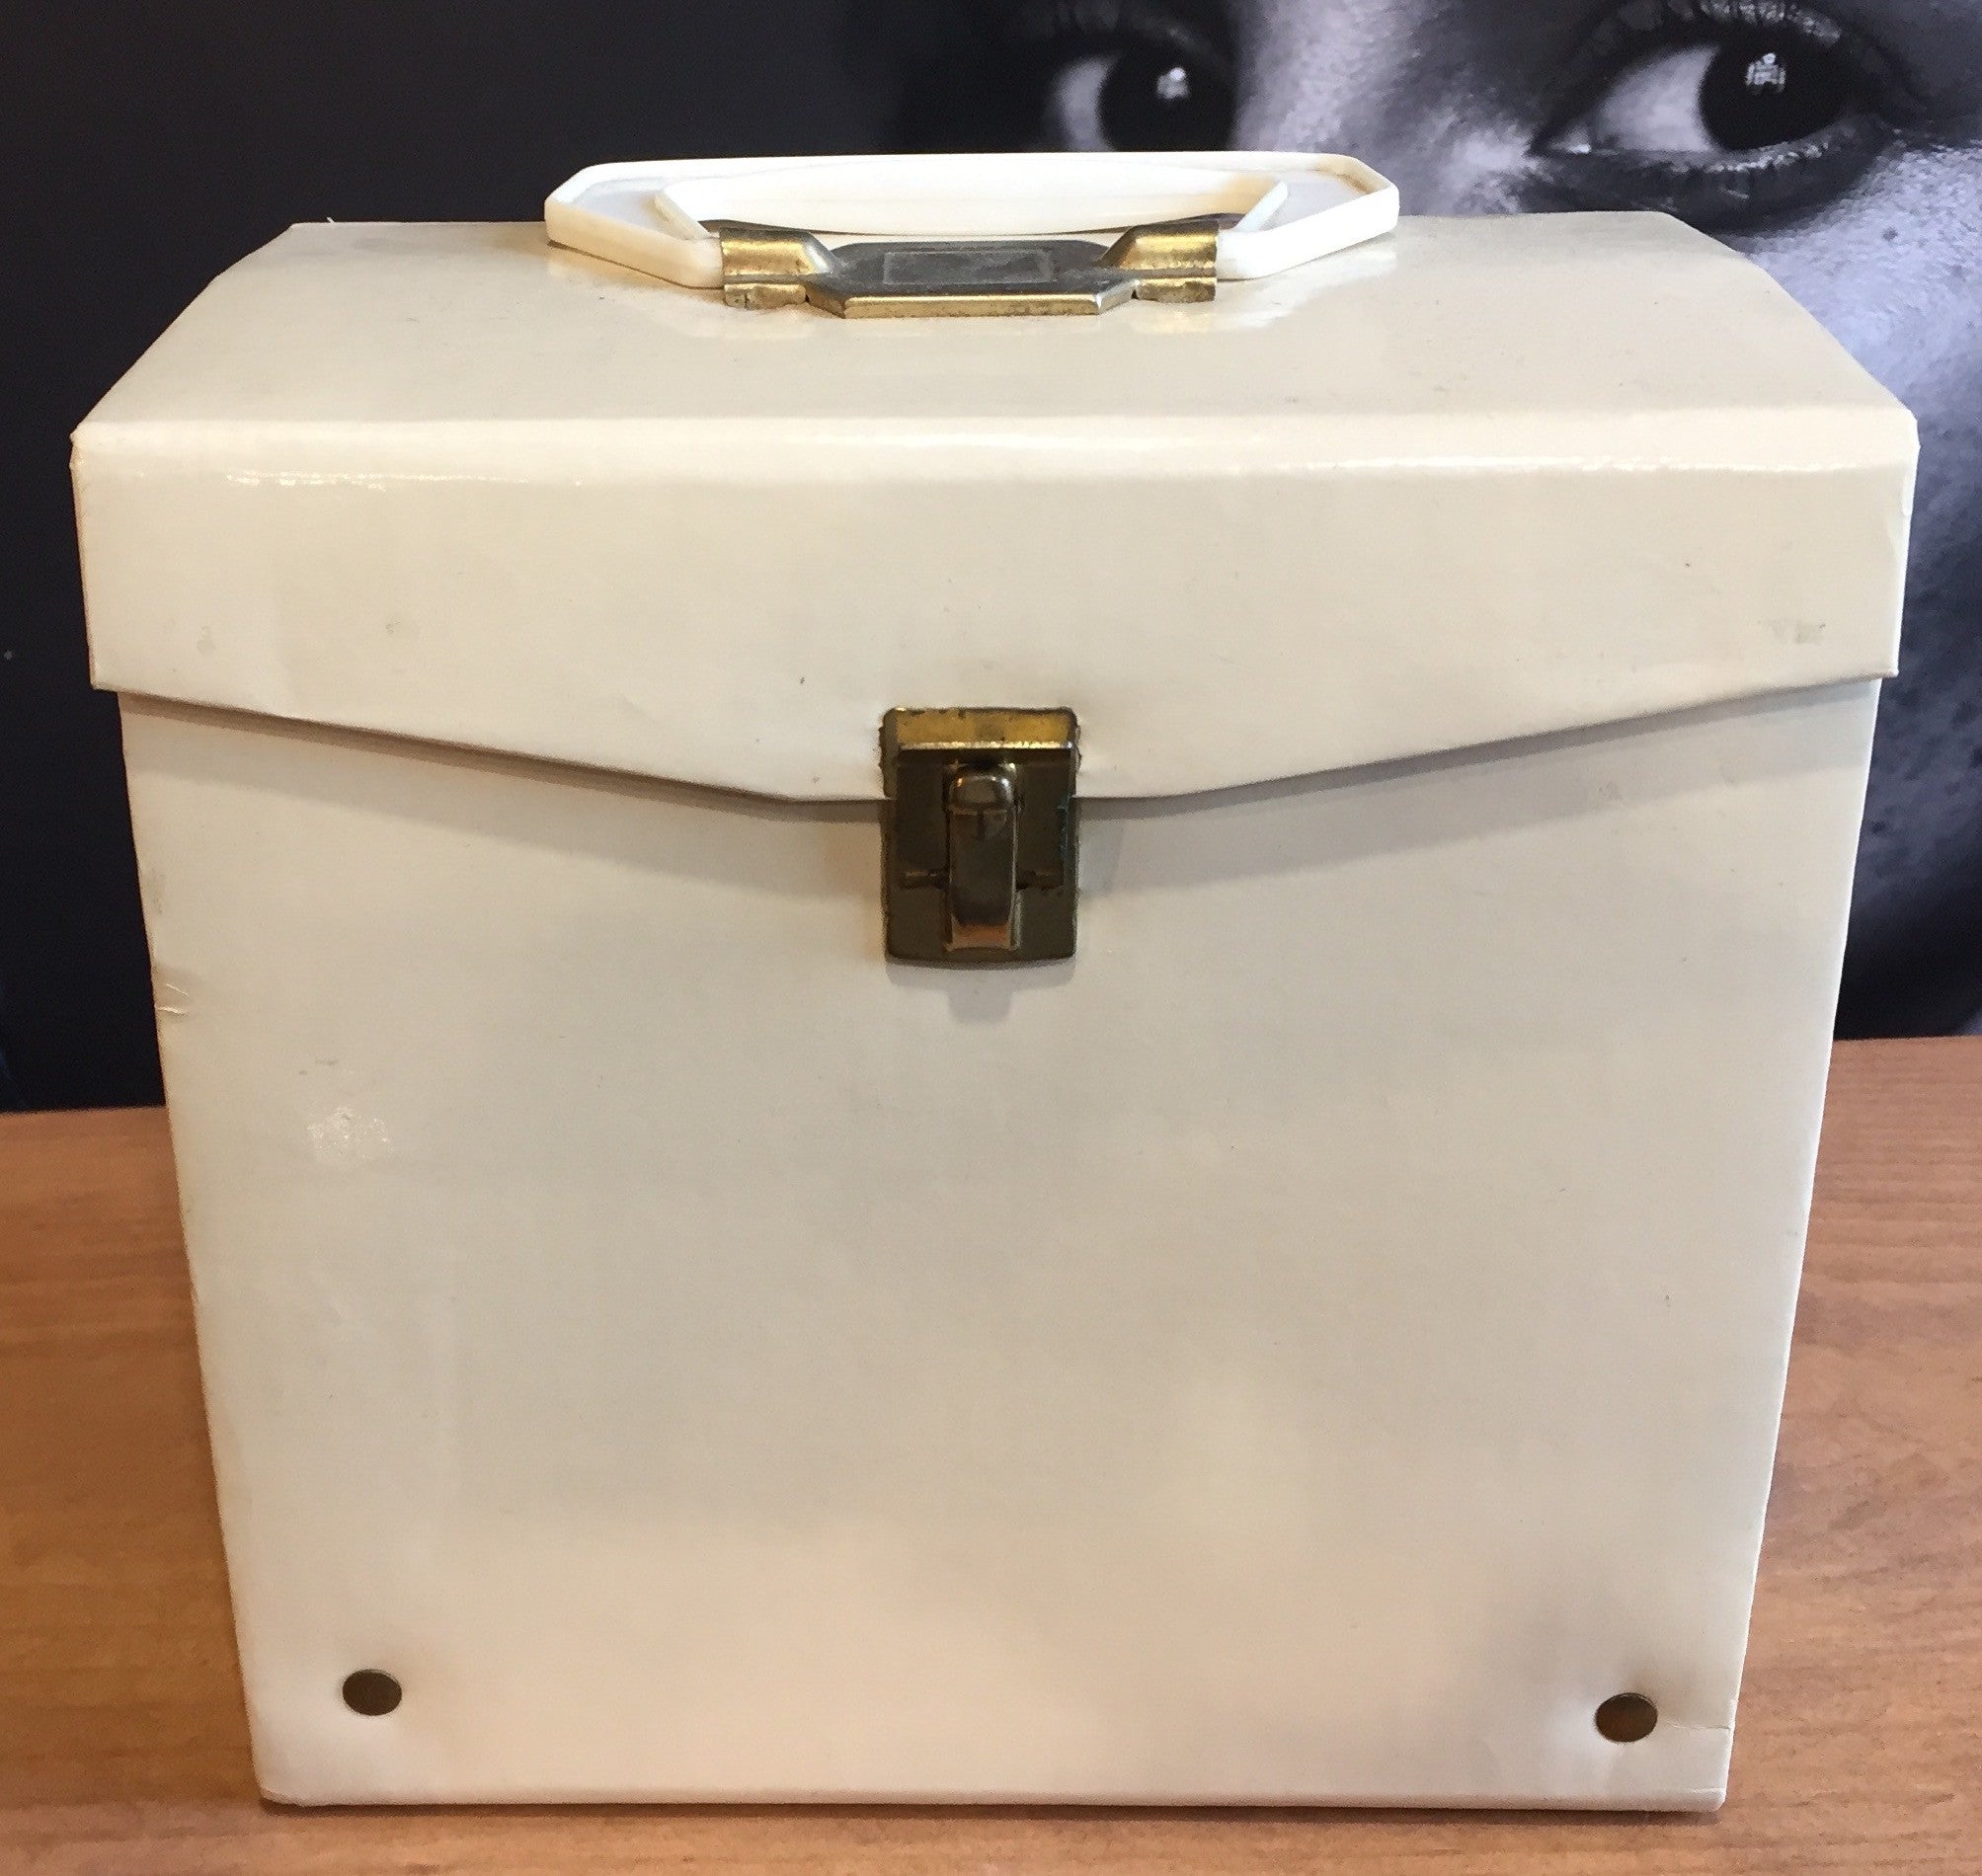 7" 45 Vintage Carry Carrying Case - Vinyl - Cream/Off White